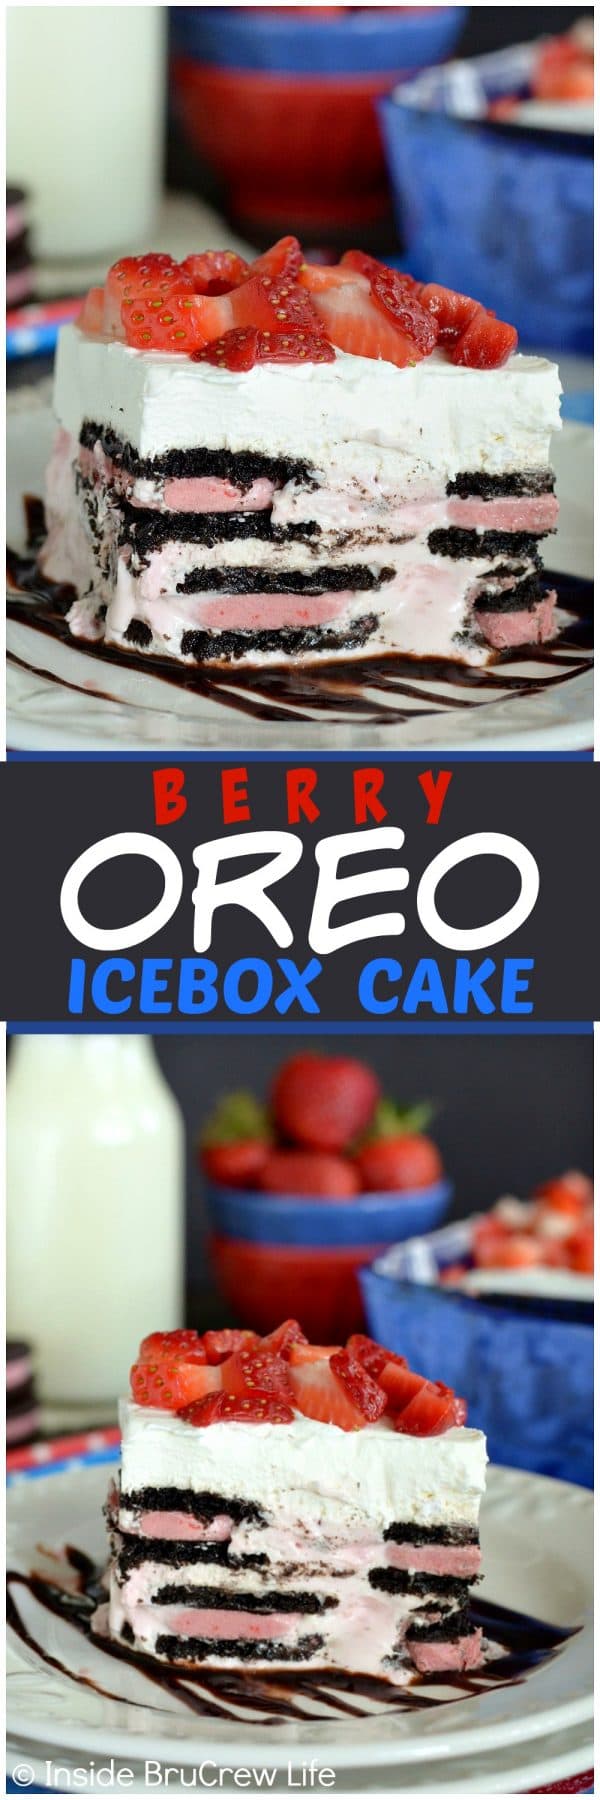 Berry Oreo Icebox Cake - this easy no bake cake has layers of berry Oreos and berry cheesecake. Awesome recipe for hot summer days!